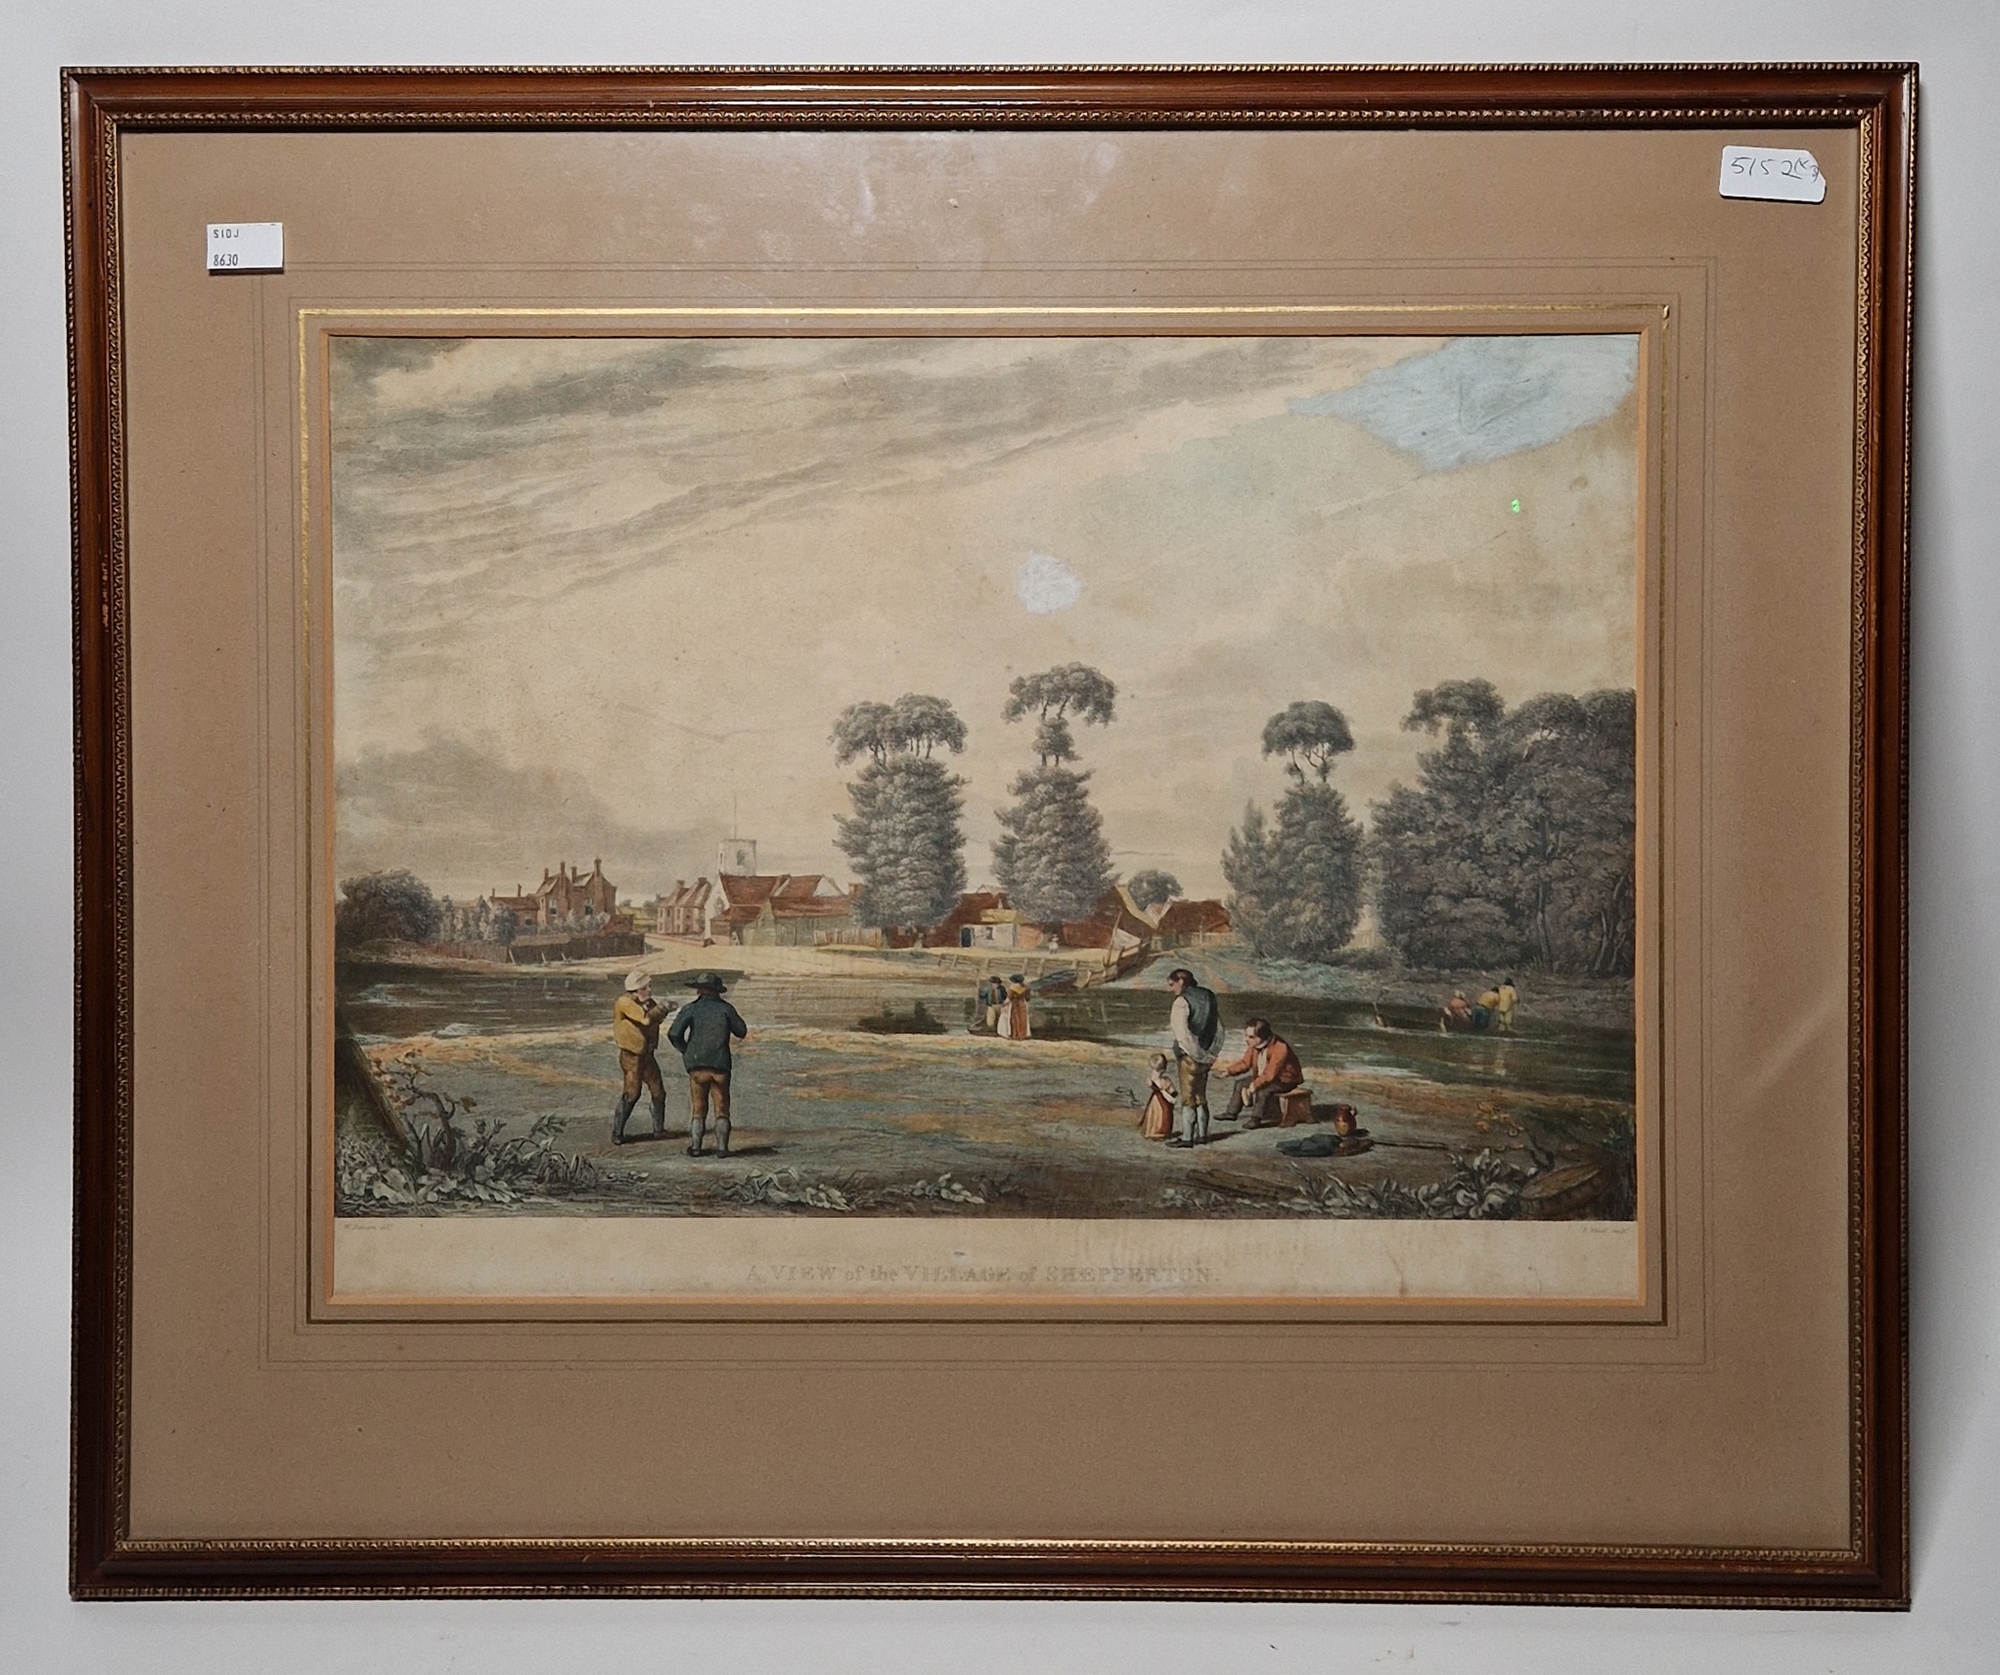 J Boydell Handcoloured engraving  "View of Shepperton", depicting horses and figures by the river, - Image 3 of 8